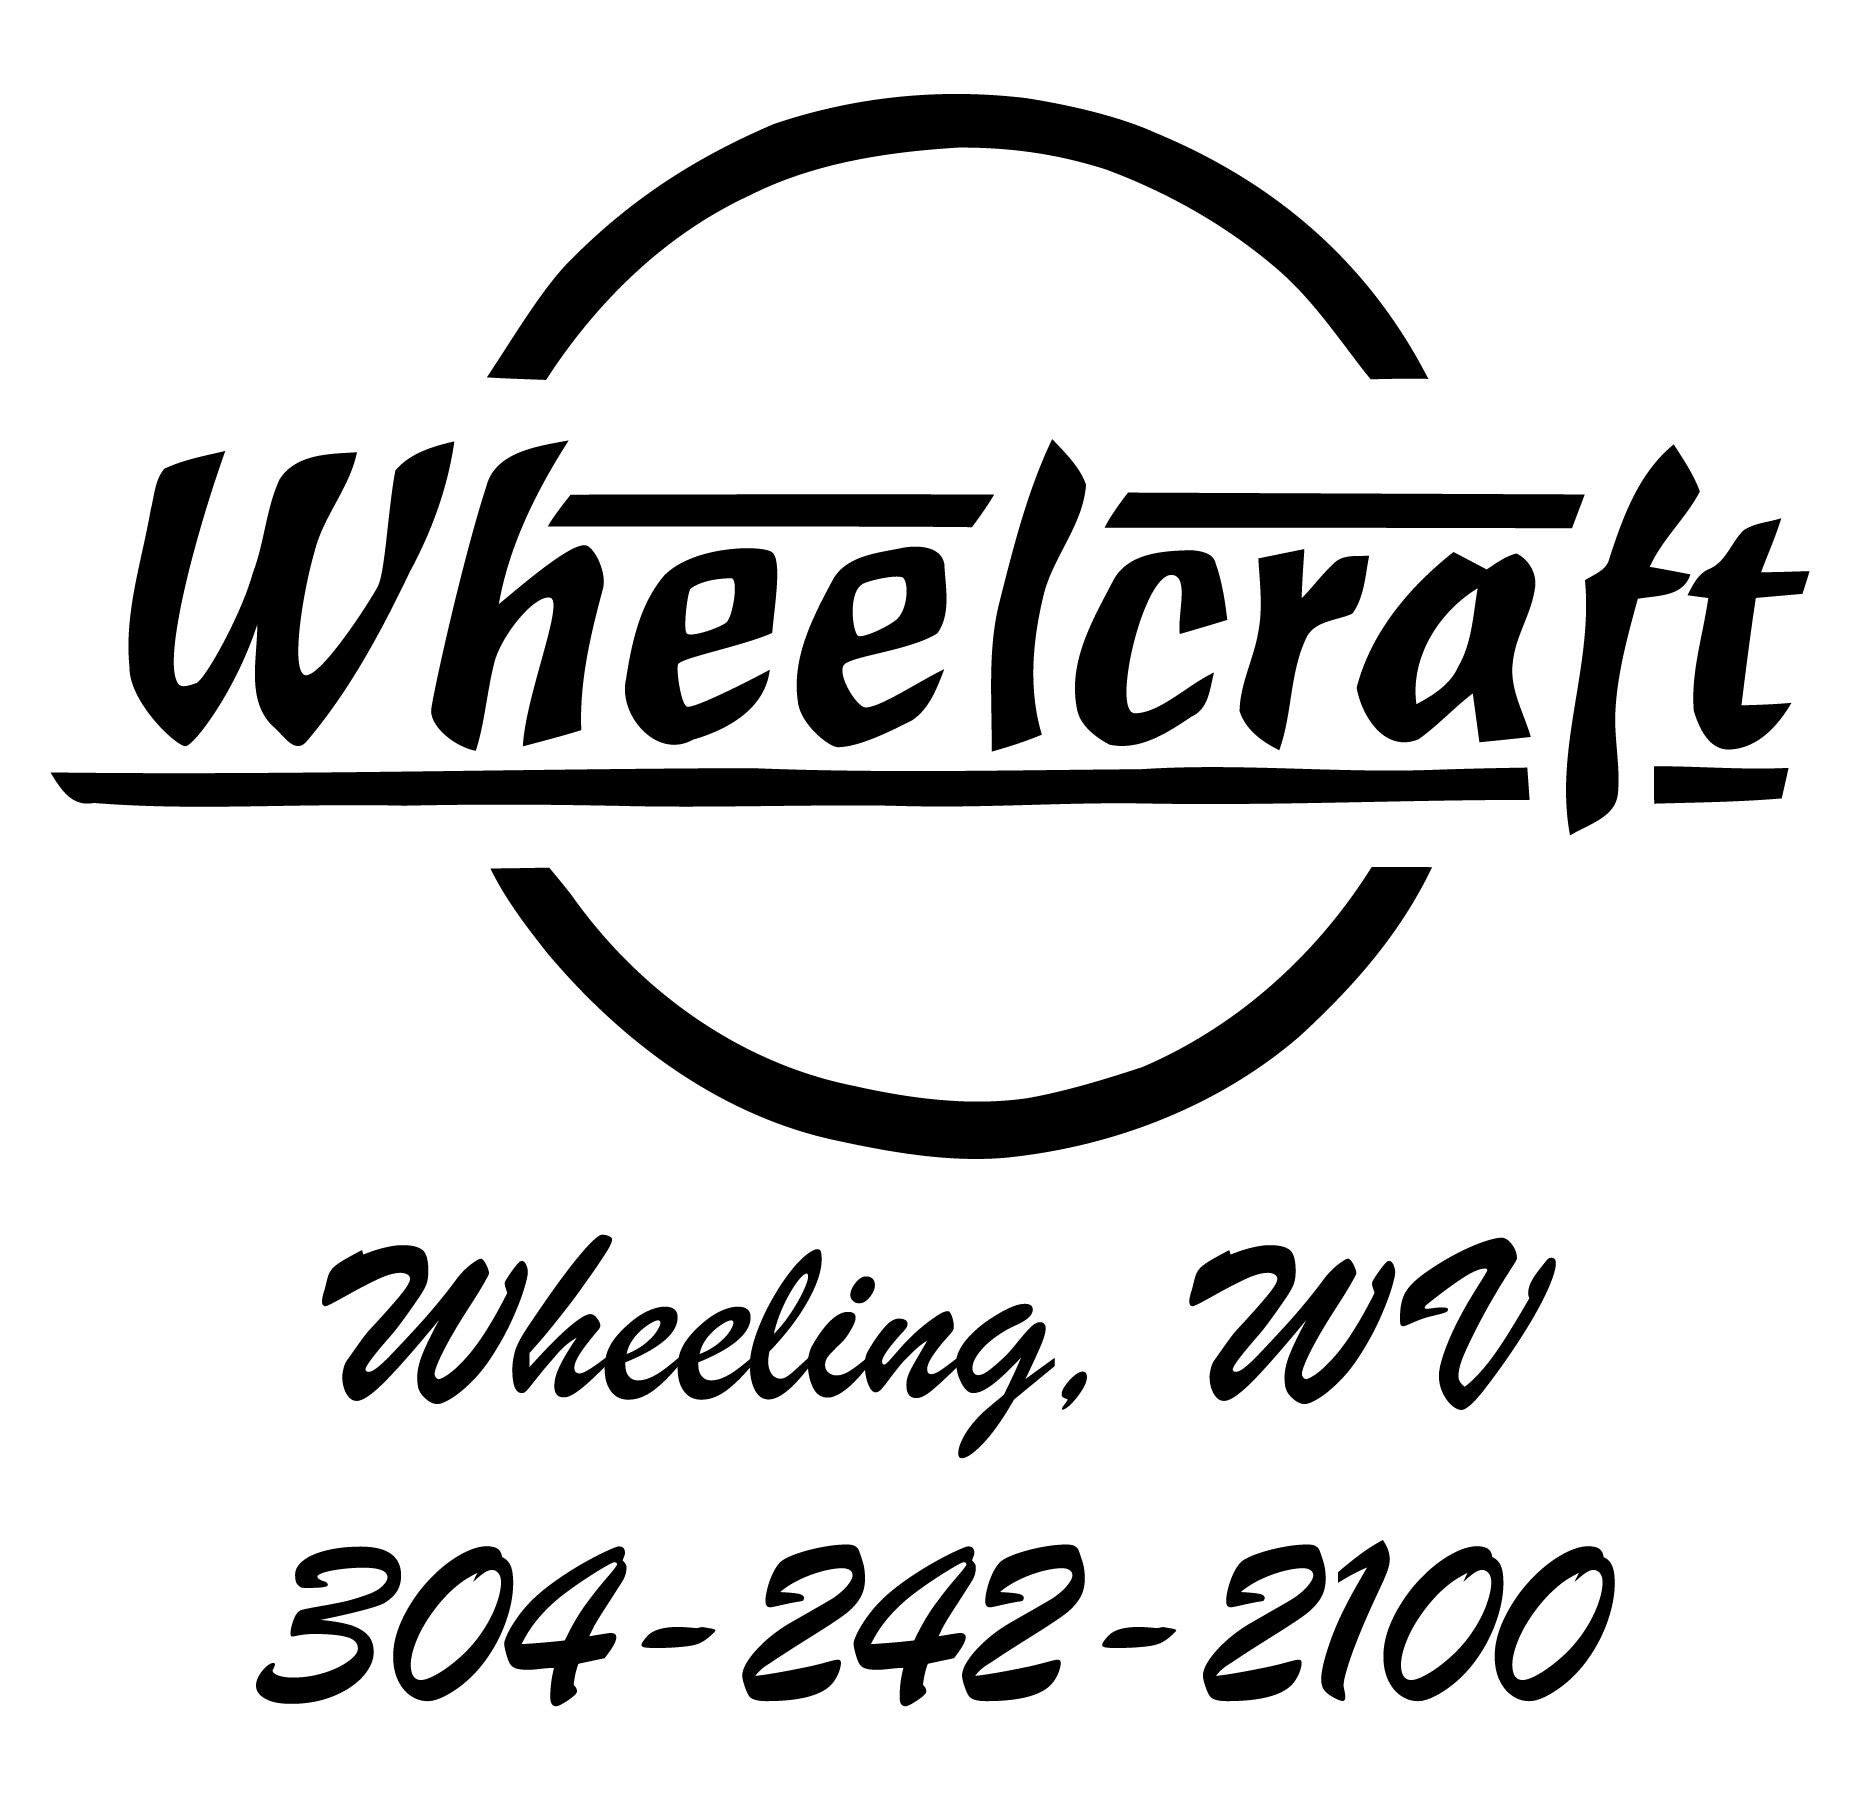 Wheelcraft Bicycles (Copy)